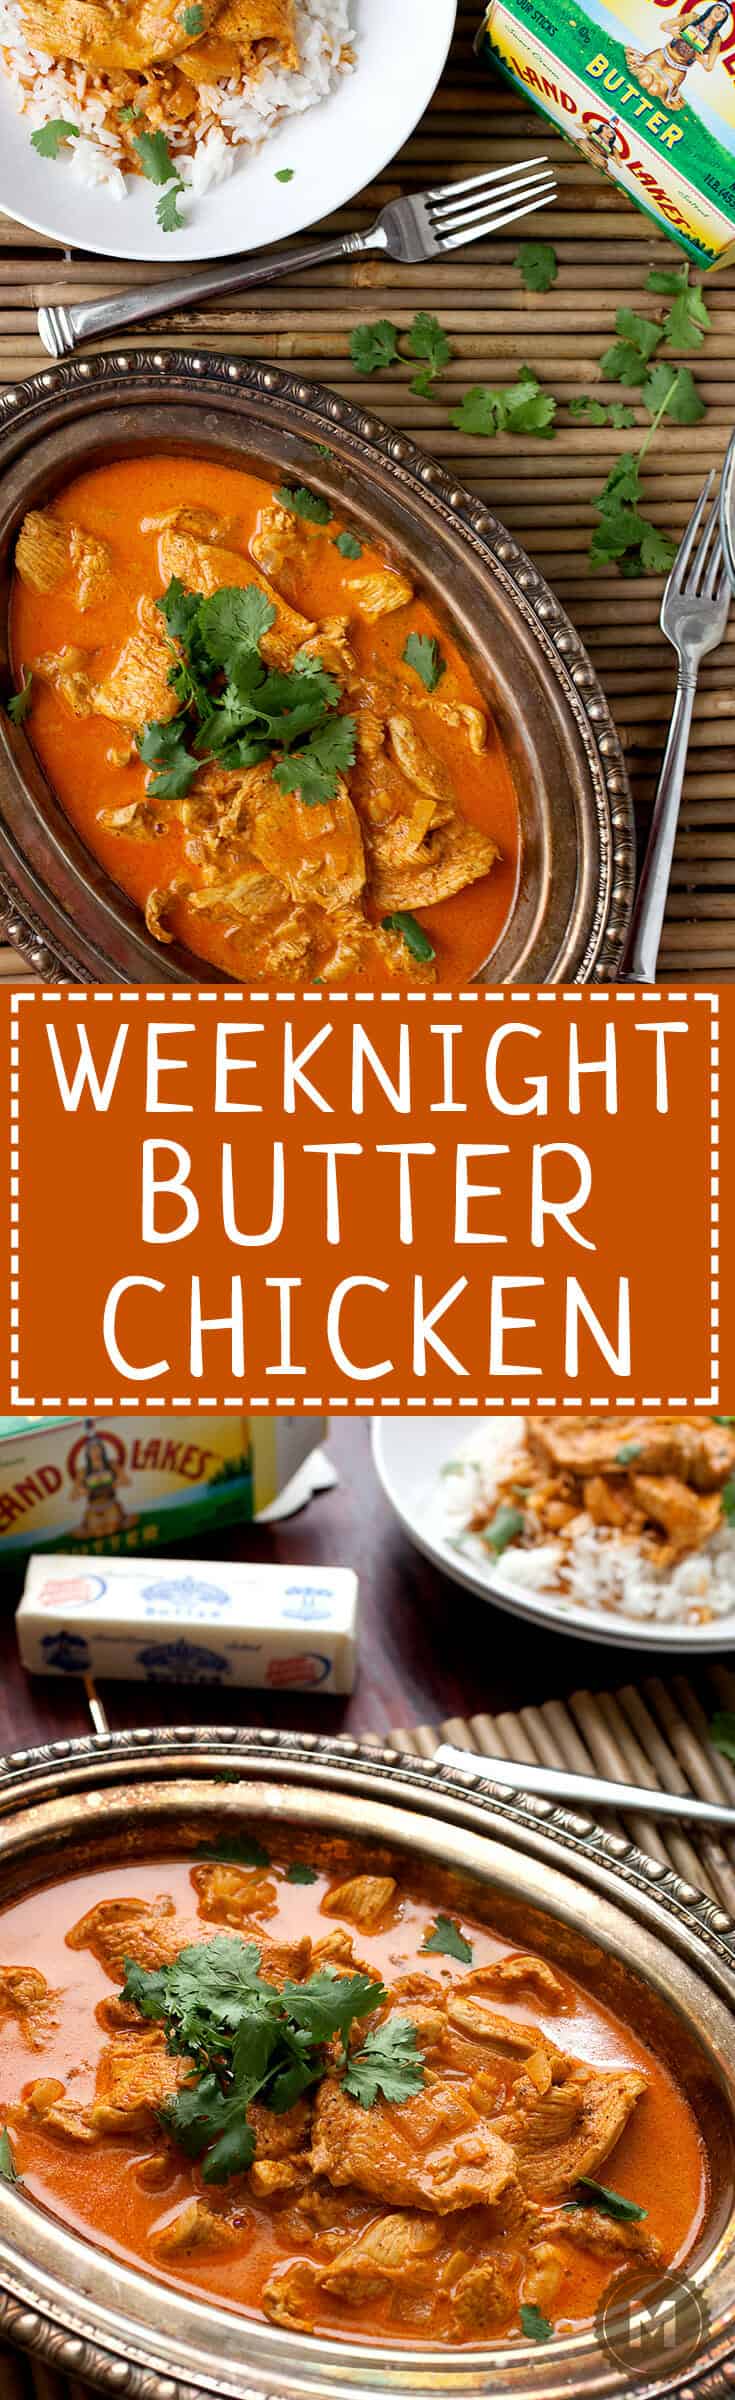 Weeknight Butter Chicken: This classic Indian recipe can easily be made on a weeknight if you plan correctly! Make this week's dinner delicious with this surprisingly fast recipe! | macheesmo.com